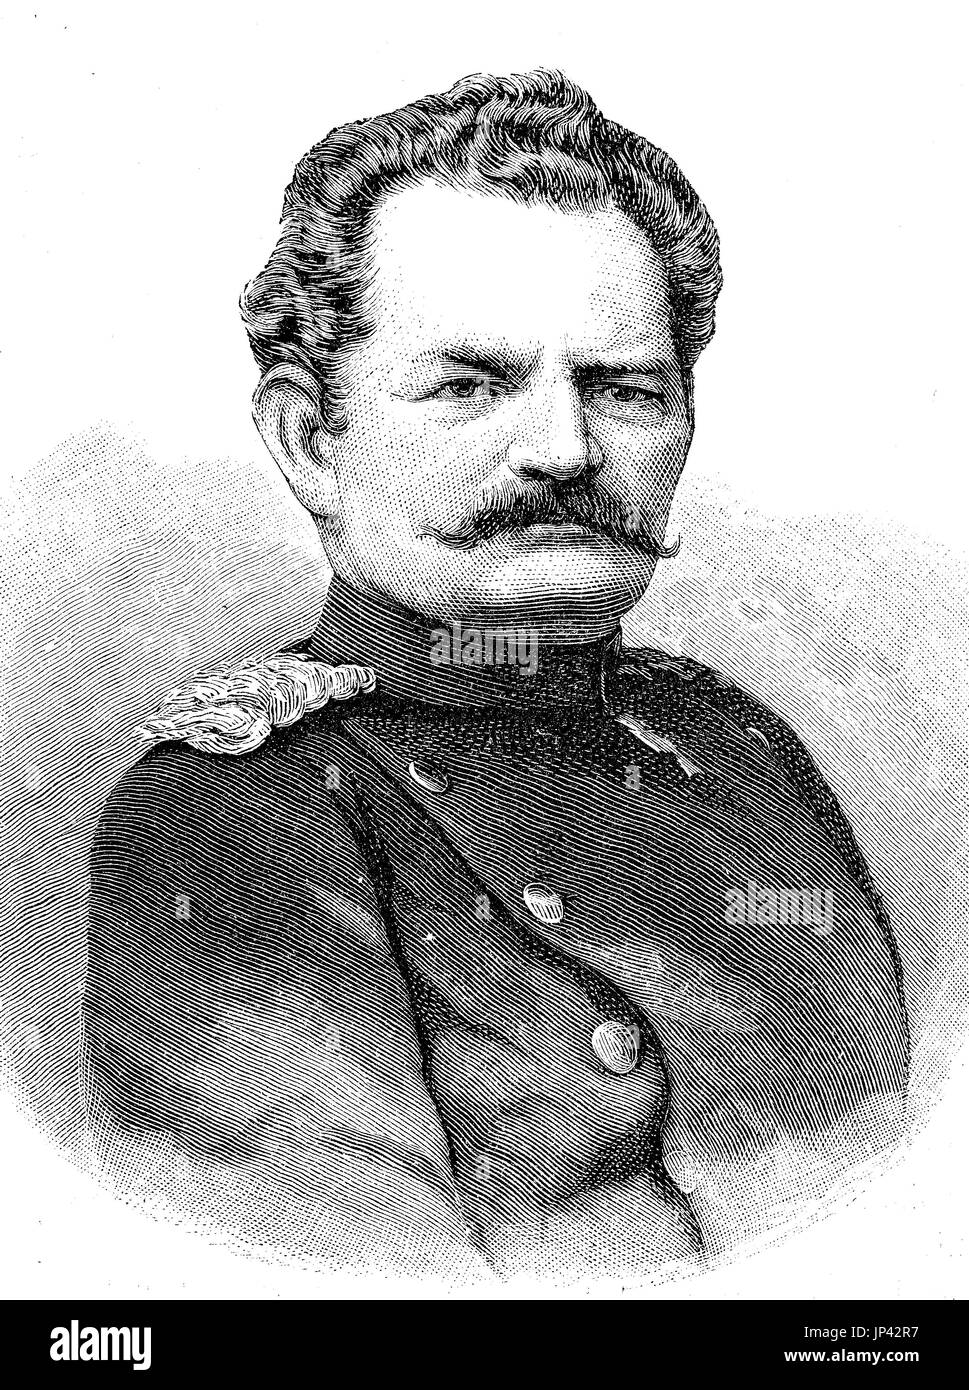 Karl Wilhelm Georg von Grolman, 30 July 1777 - 1 June 1843, was a Prussian general who fought in the Napoleonic Wars, Germany, digital improved reproduction of a woodcut publication from the year 1888 Stock Photo